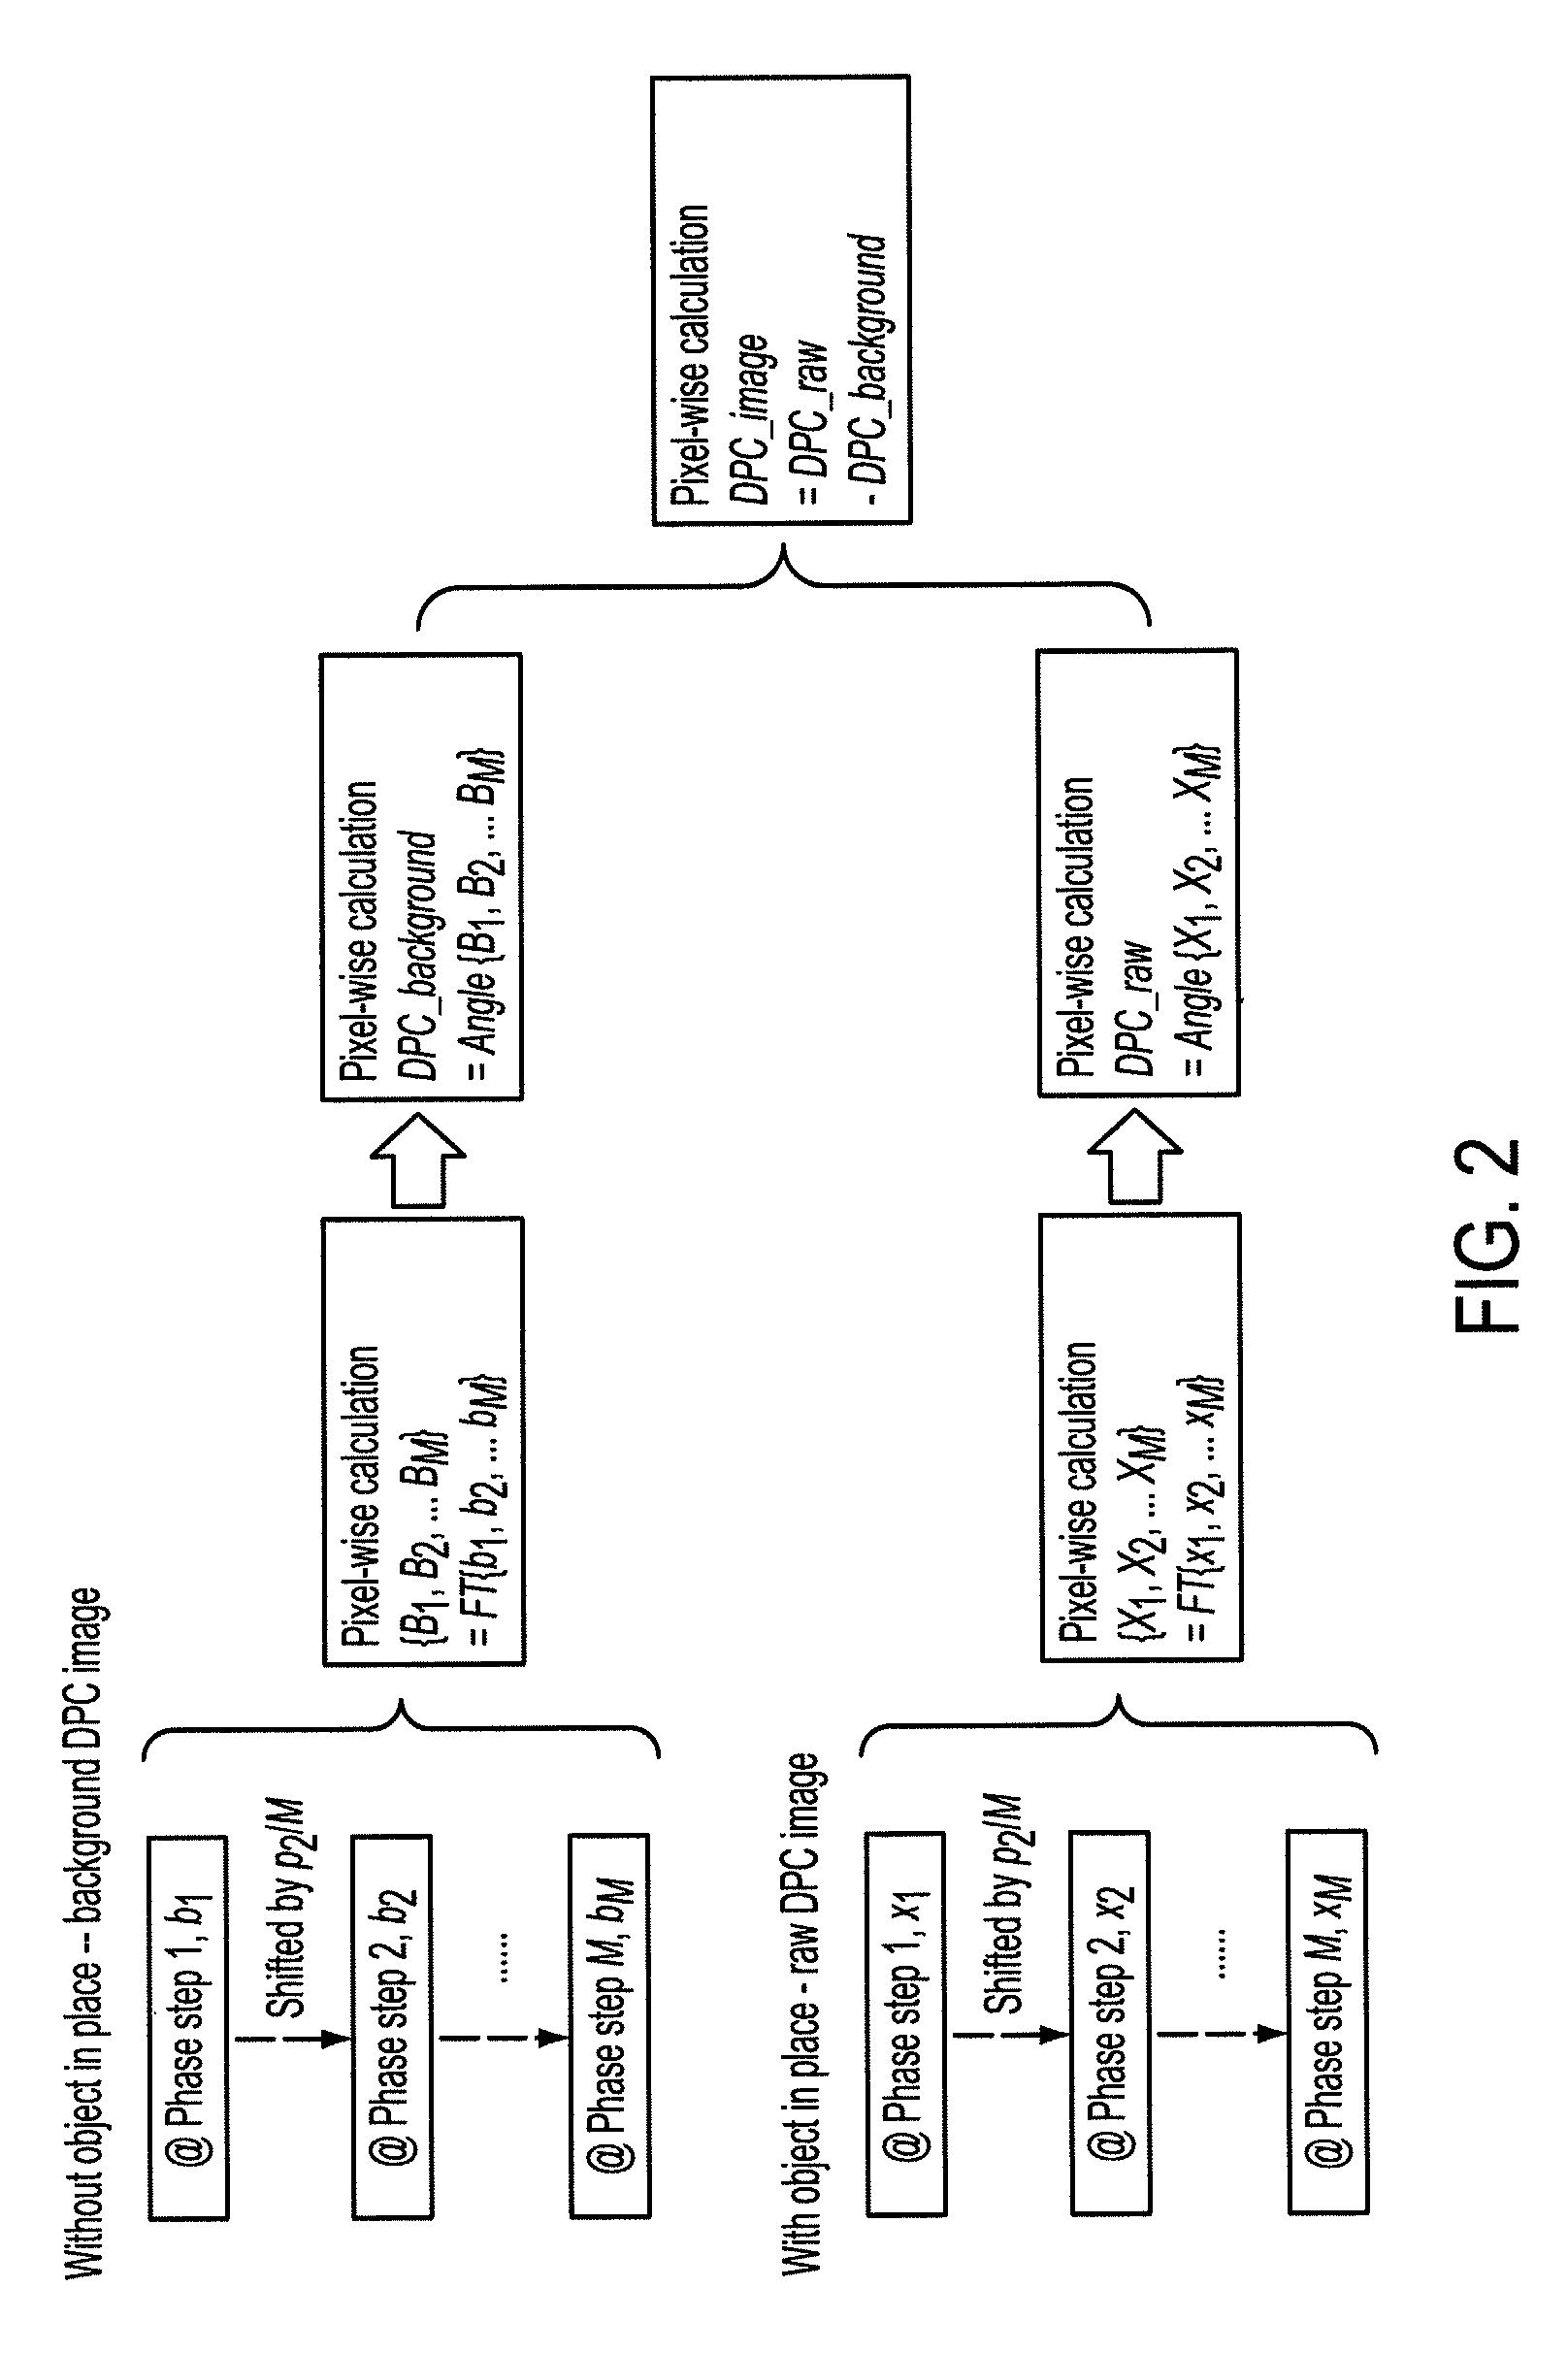 Methods and apparatus for differential phase-contrast fan beam CT, cone-beam CT and hybrid cone-beam CT